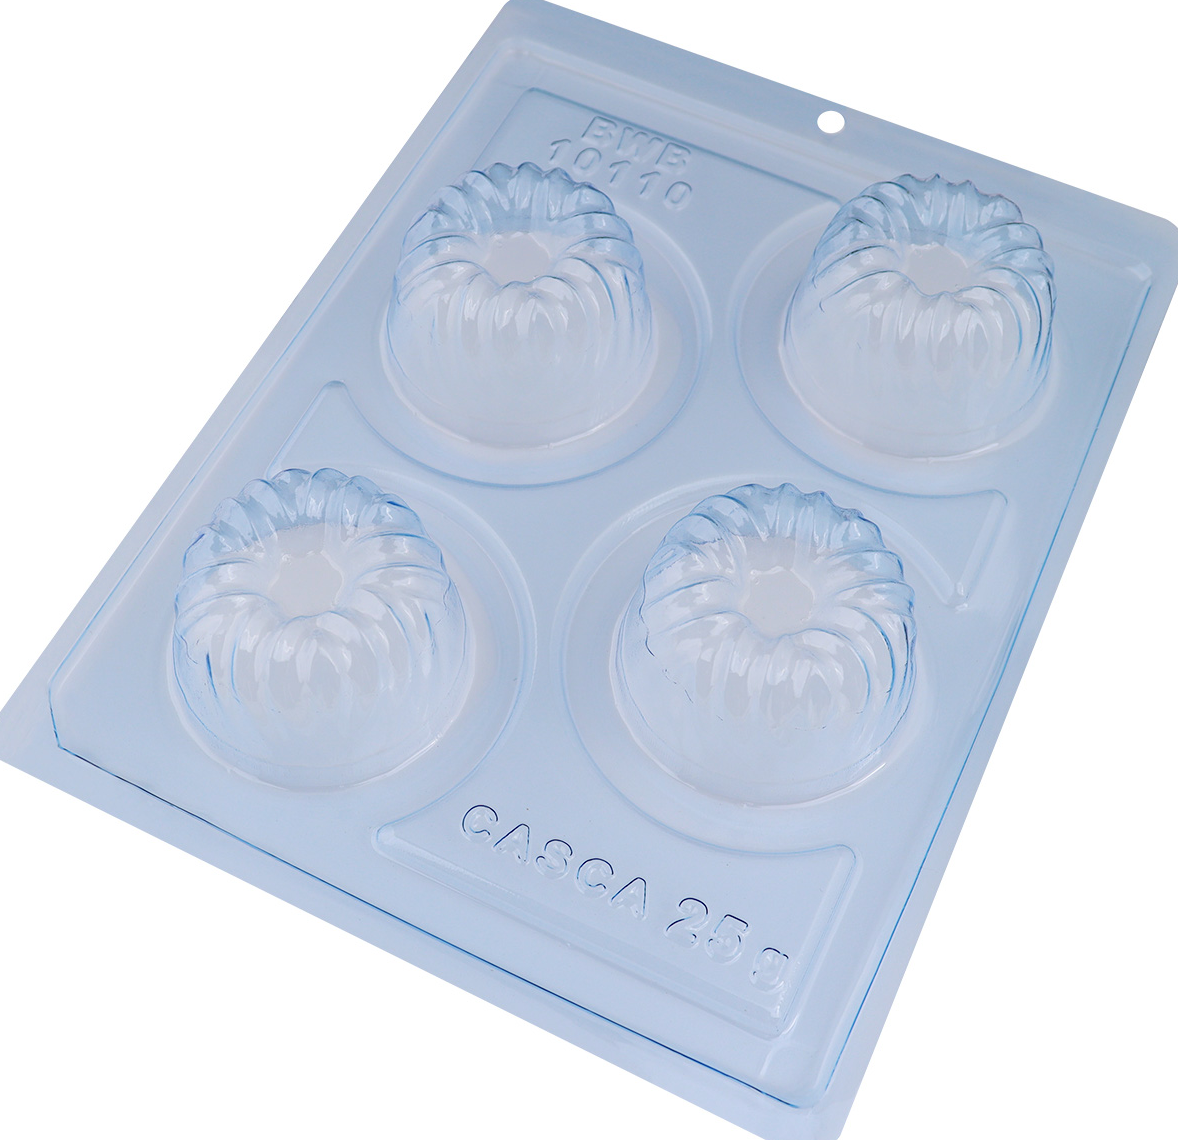 Bundt Cakes (Small Size) - 3 Part Chocolate Mold